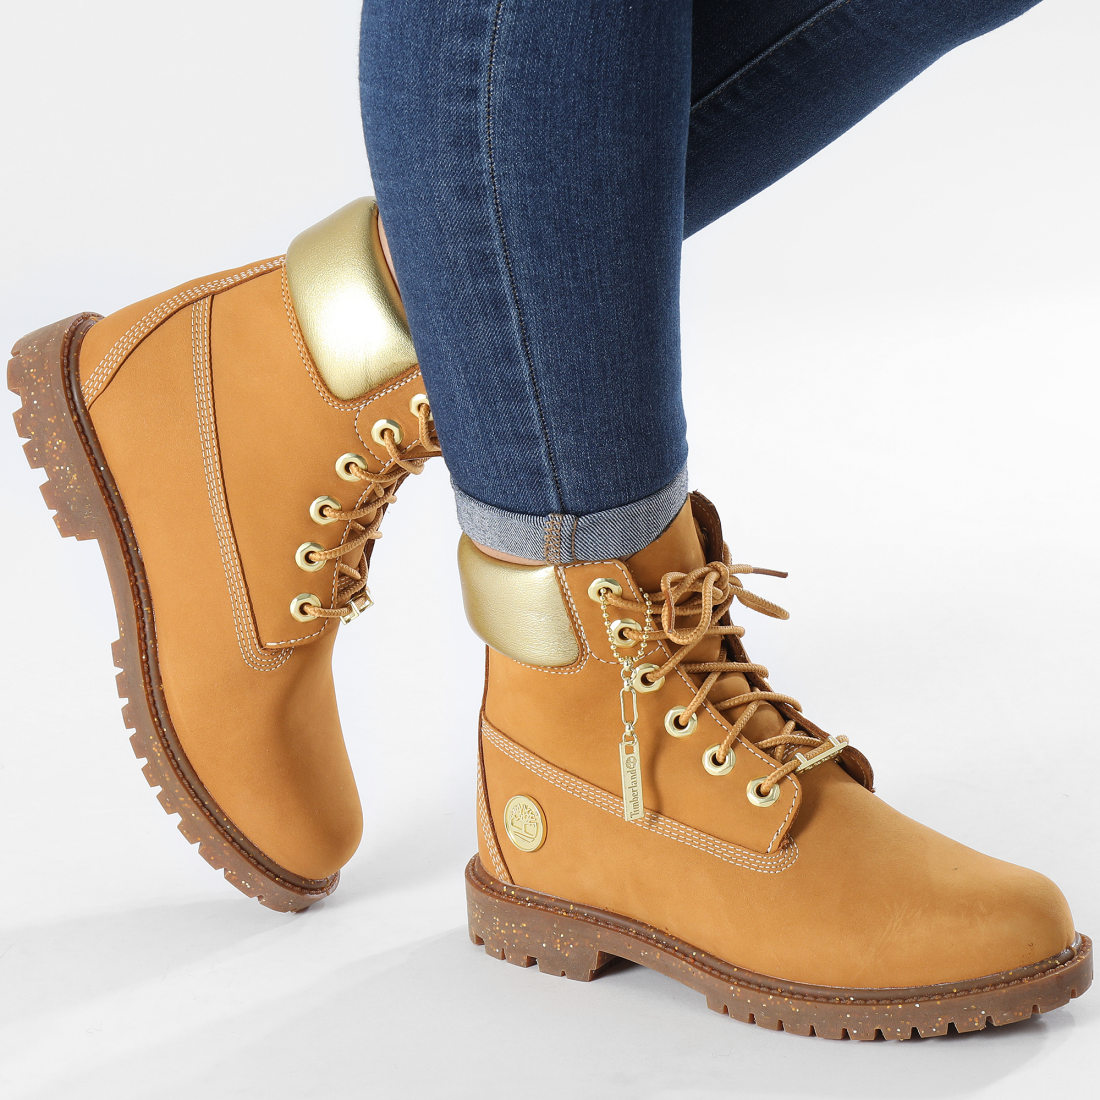 Timberland - Boots Femme 6 Inch Heritage Waterproof A5RS8 Wheat Nubuck